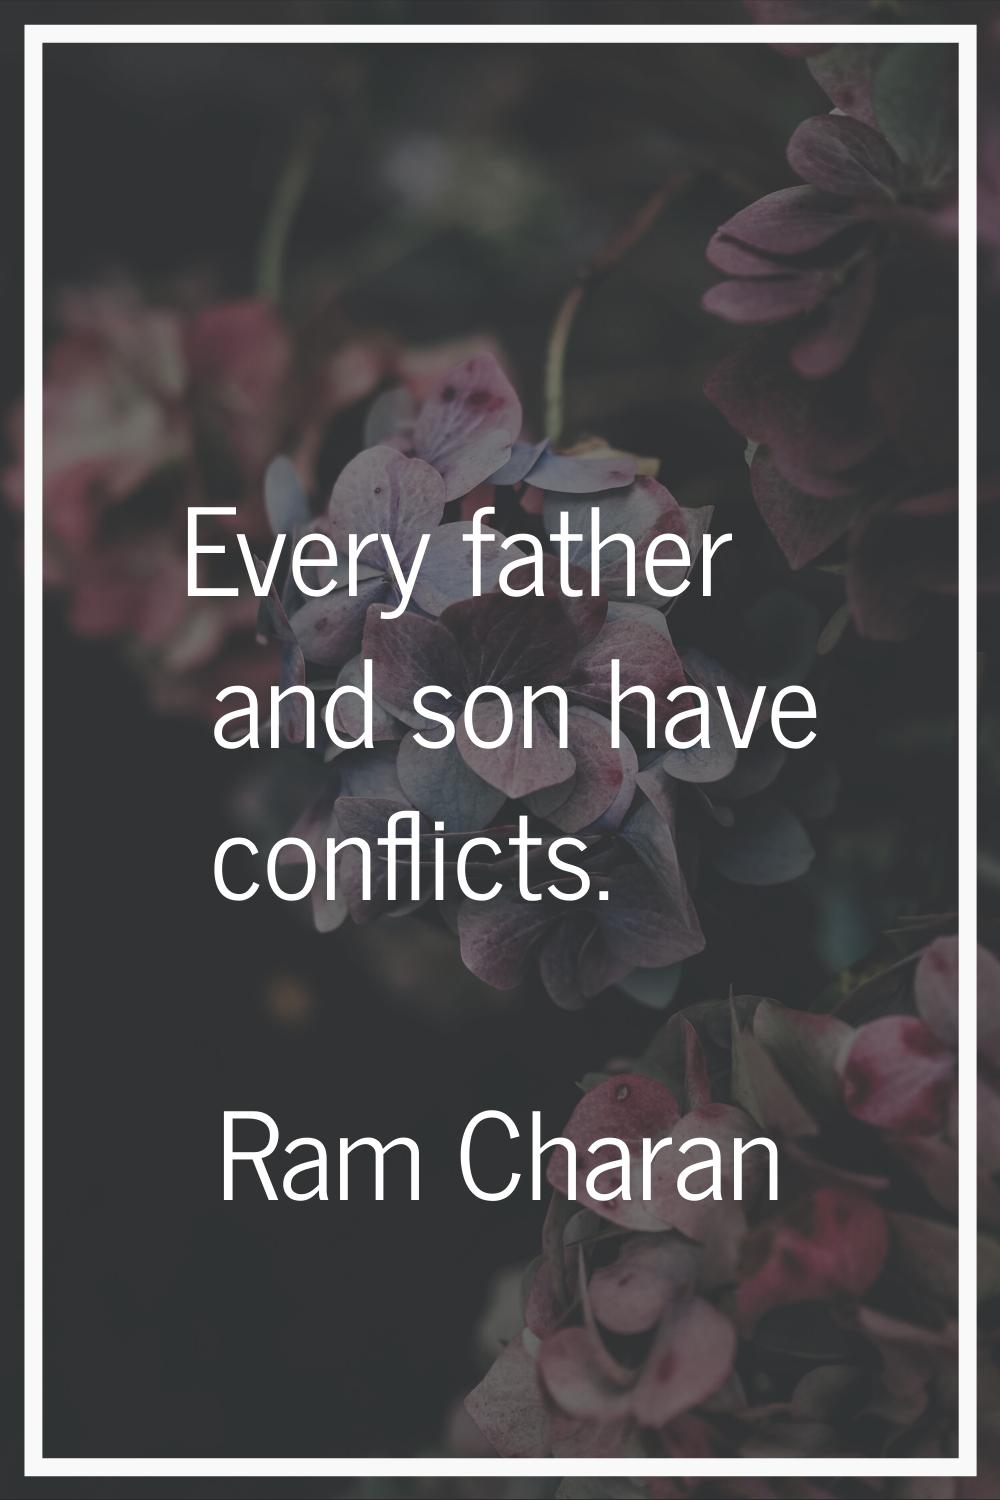 Every father and son have conflicts.